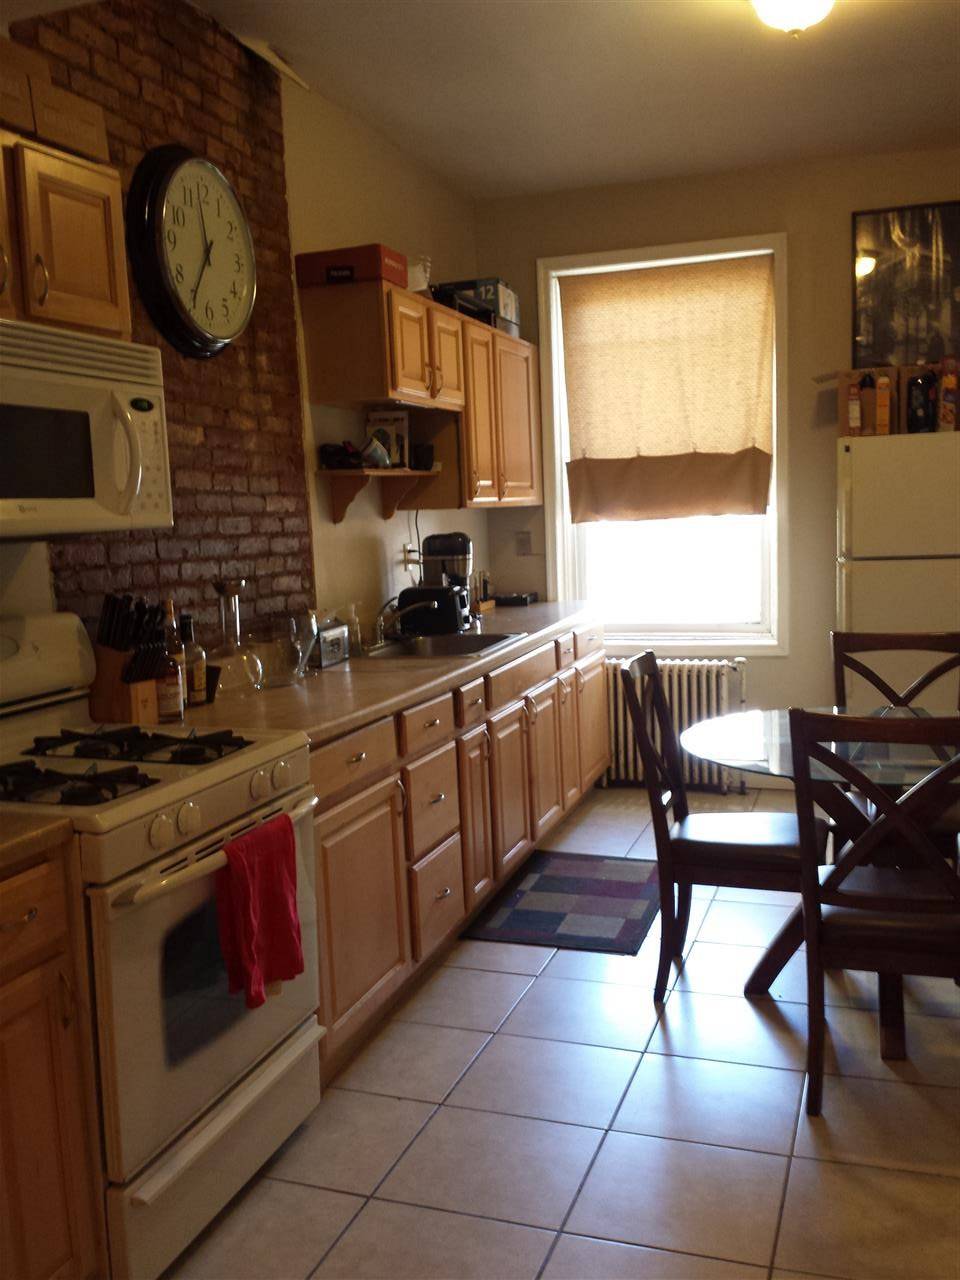 PRIME LOCATION - 1 BR New Jersey